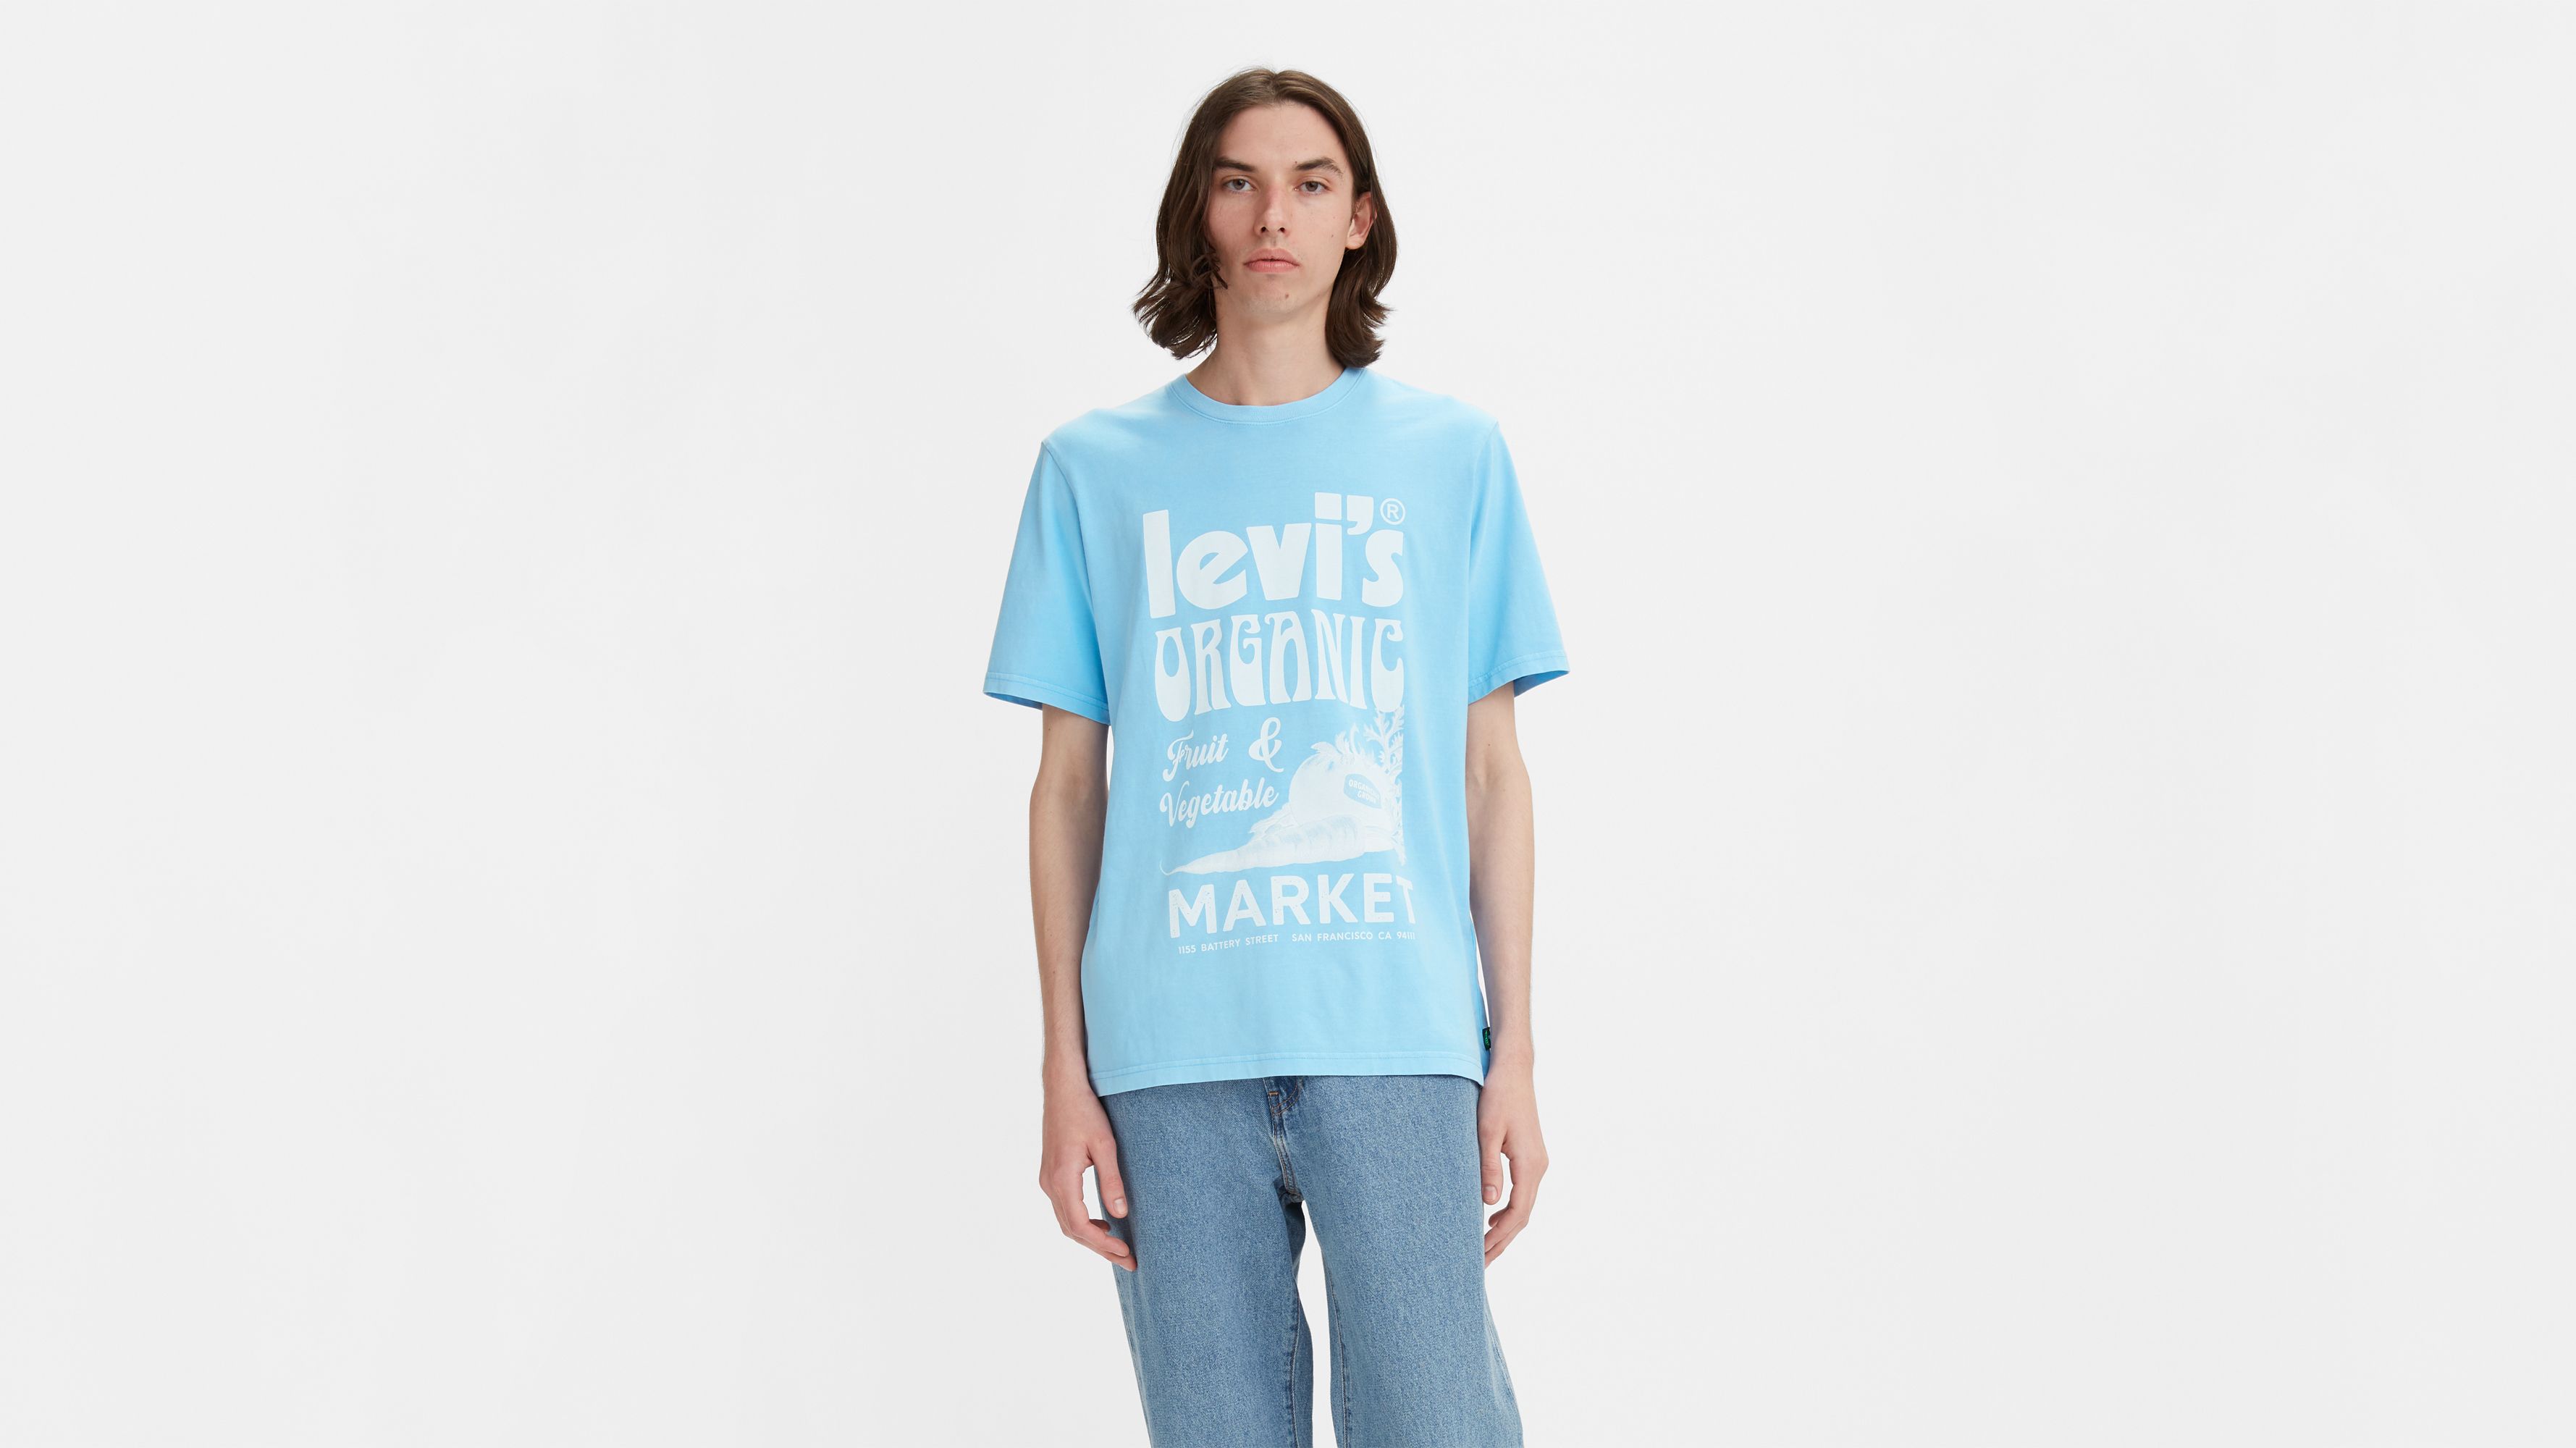 Levi's relaxed fit t-shirt with allover logo print in multi